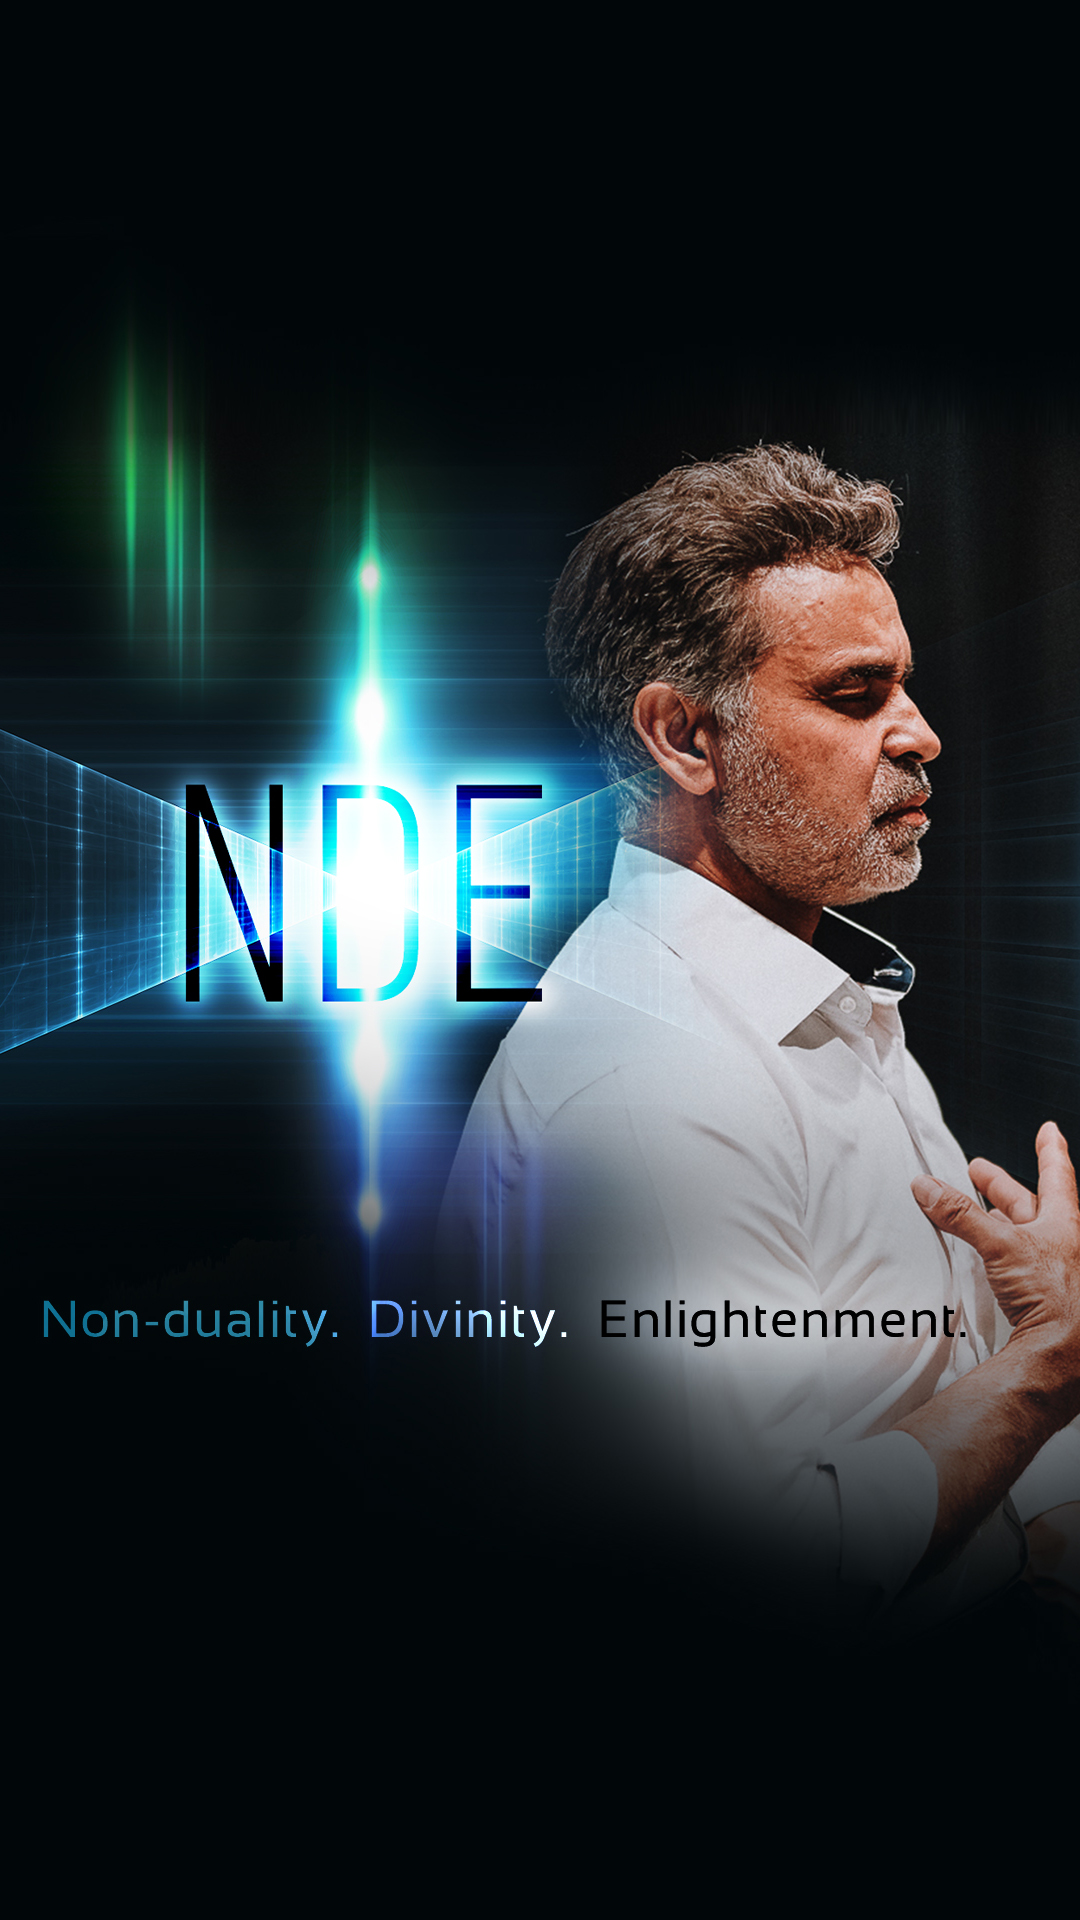 NDE : Nonduality, Divinity, Enlightenment